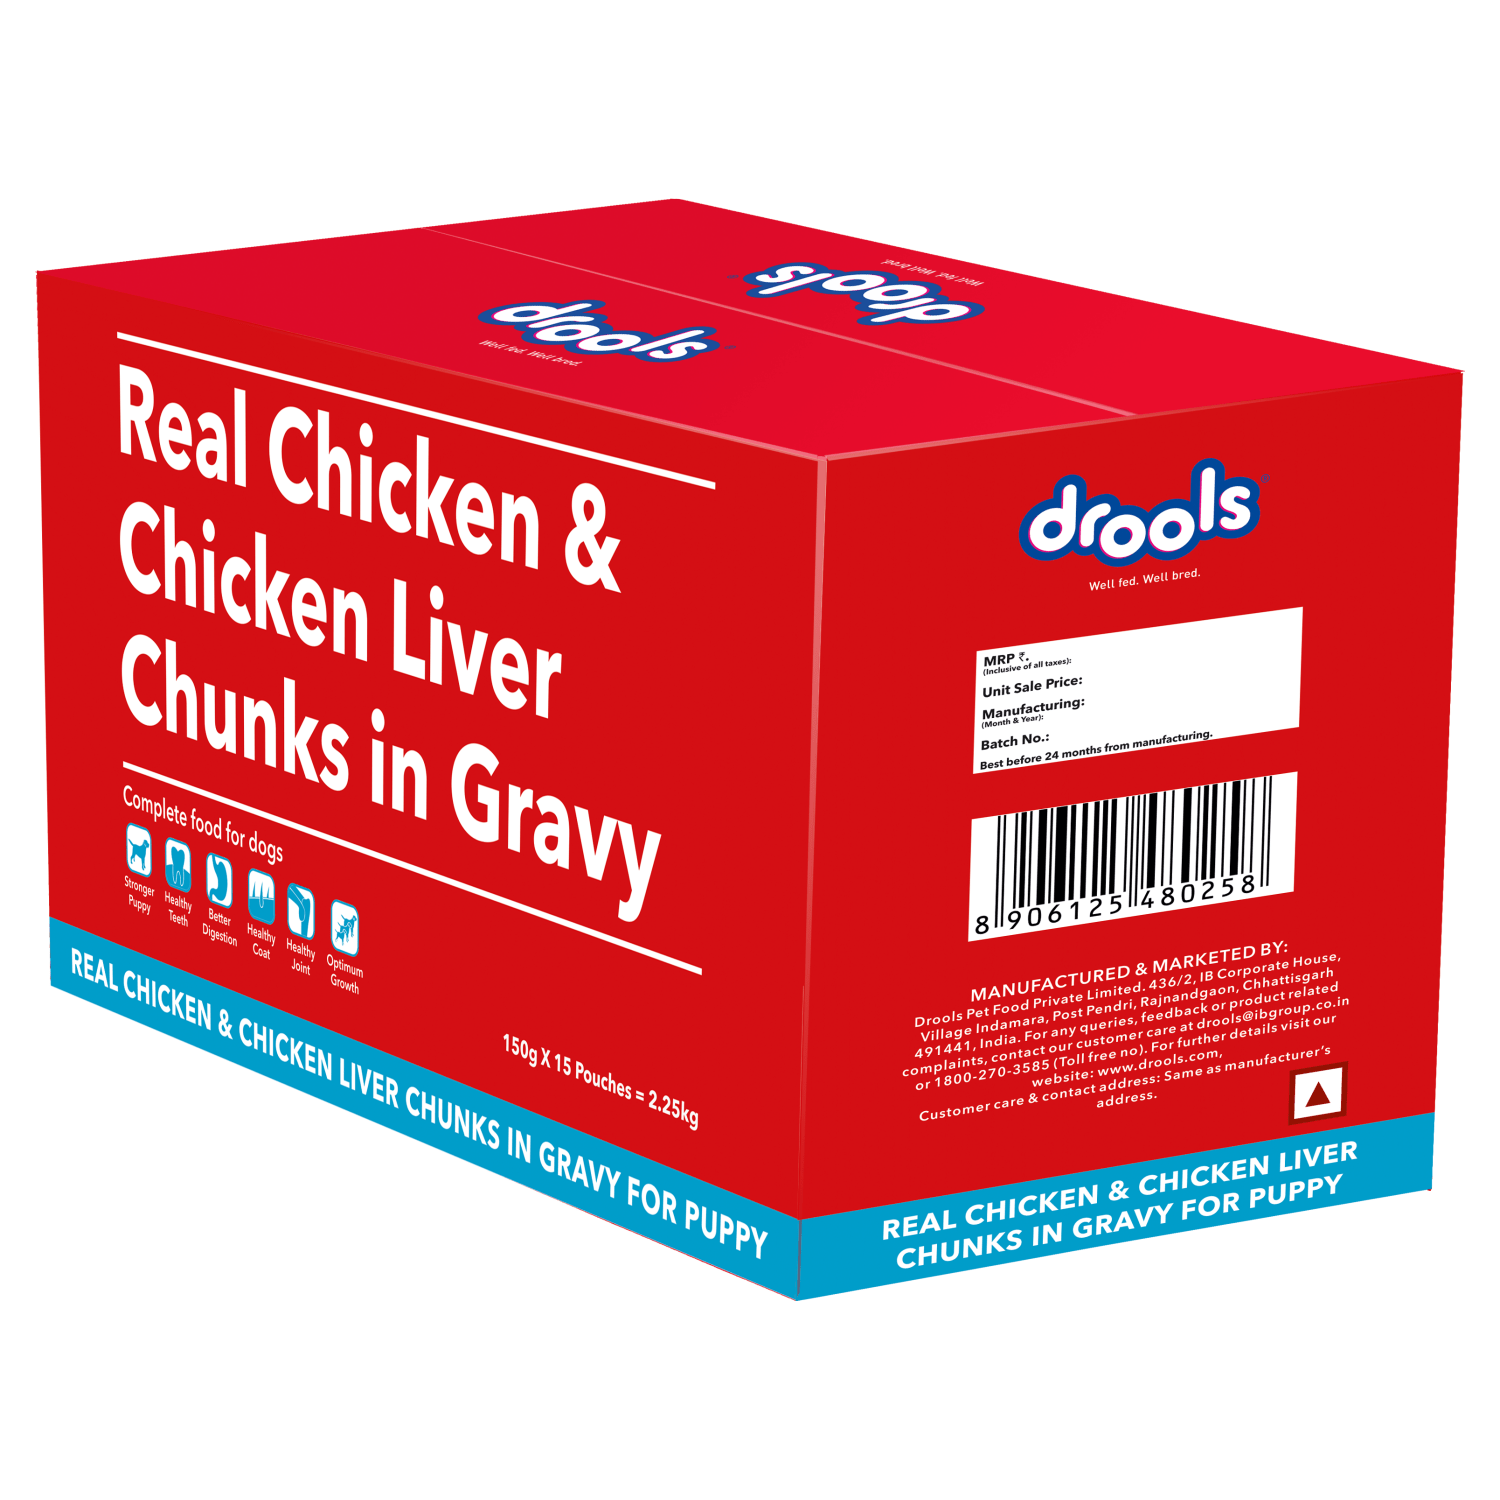 Drools Real Chicken & Chicken Liver Chunks in Gravy Puppy Wet Food